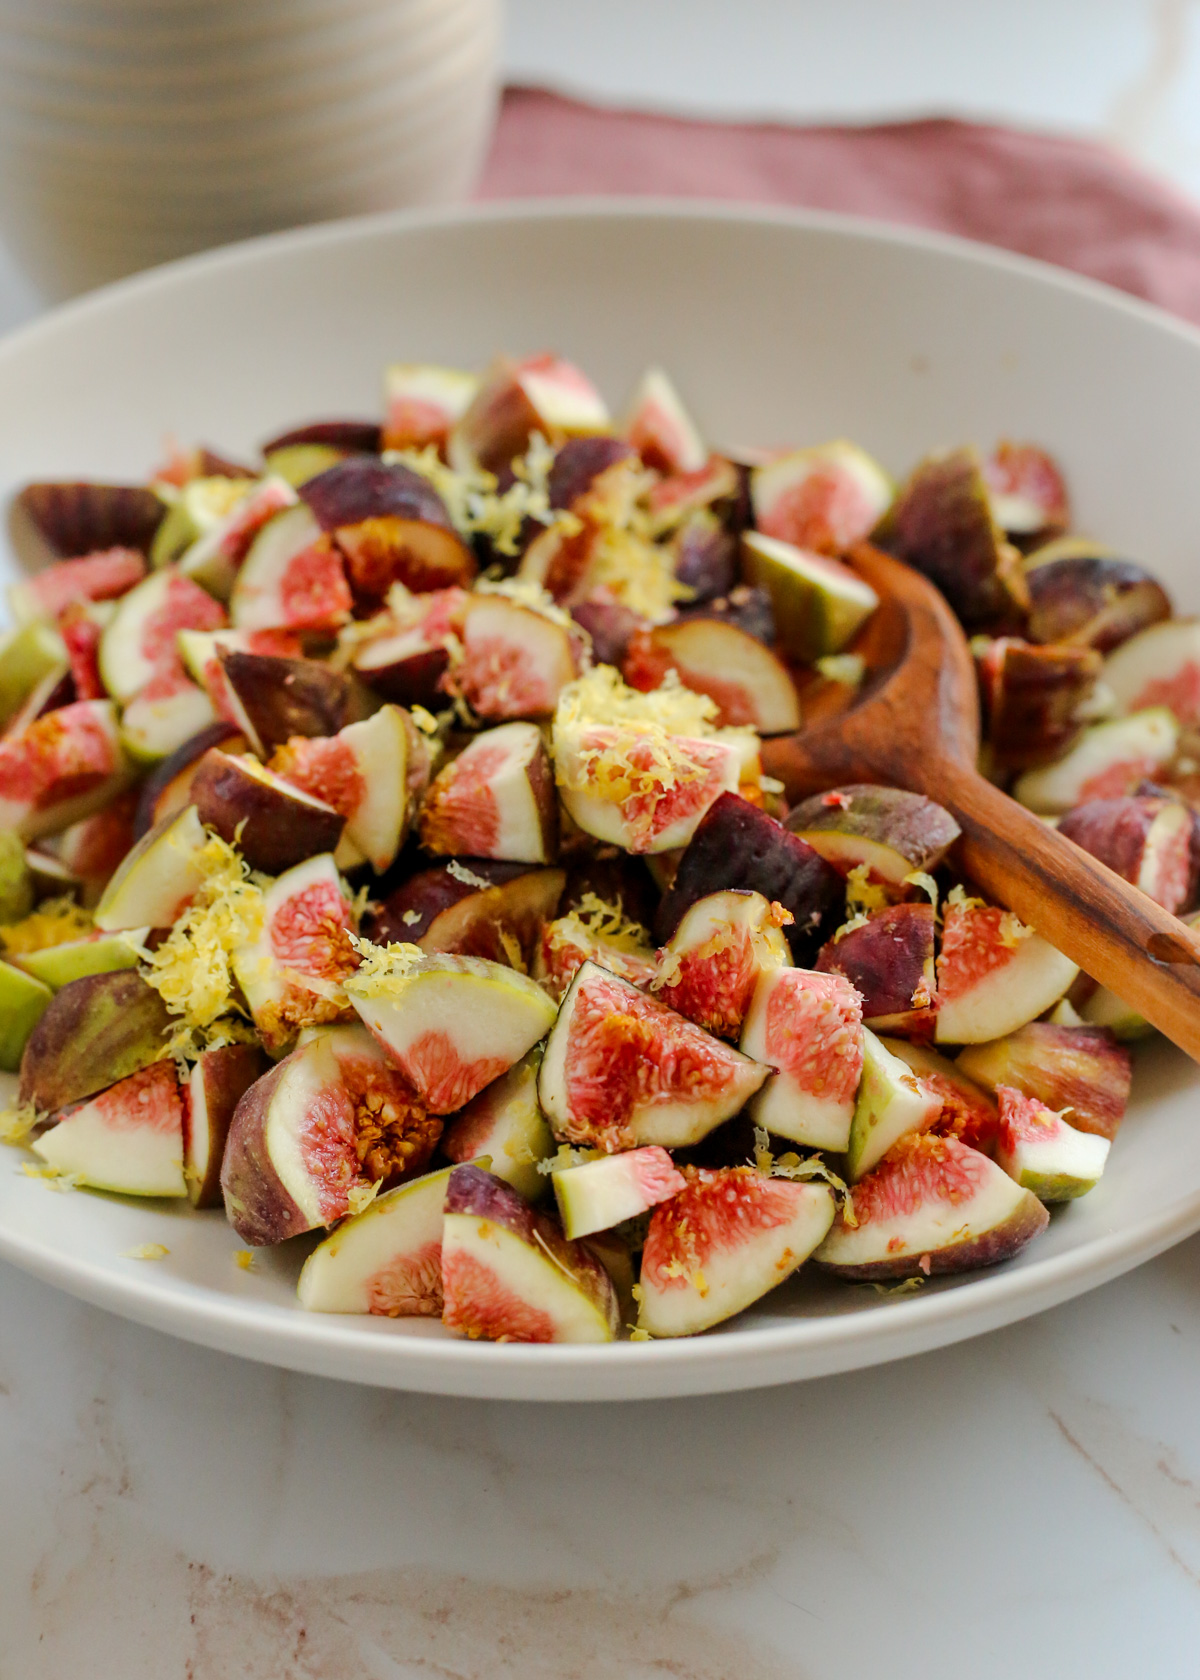 Angled view into a large shallow bowl holding fresh figs that have been sliced and chopped into small pieces. Lemon zest is visible on top and a wooden spoon rests on the side of the bowl